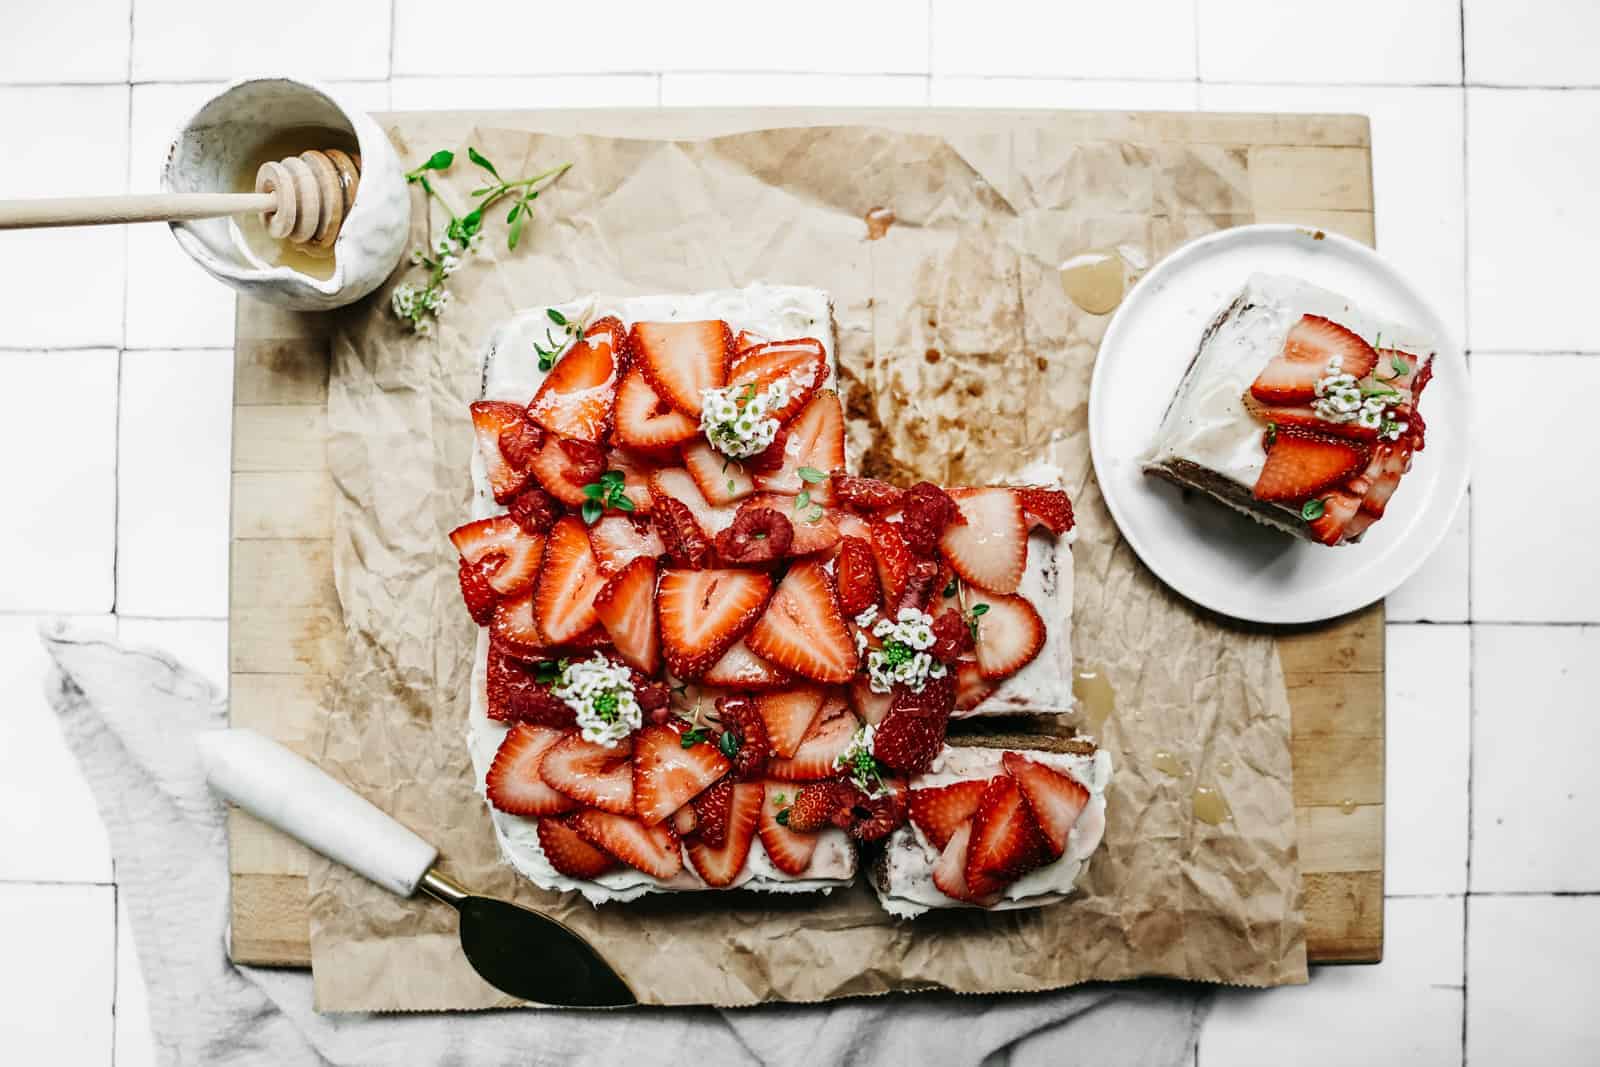 Yummy spring Honey Cake sitting on a cutting board with fresh strawberries sliced on top.